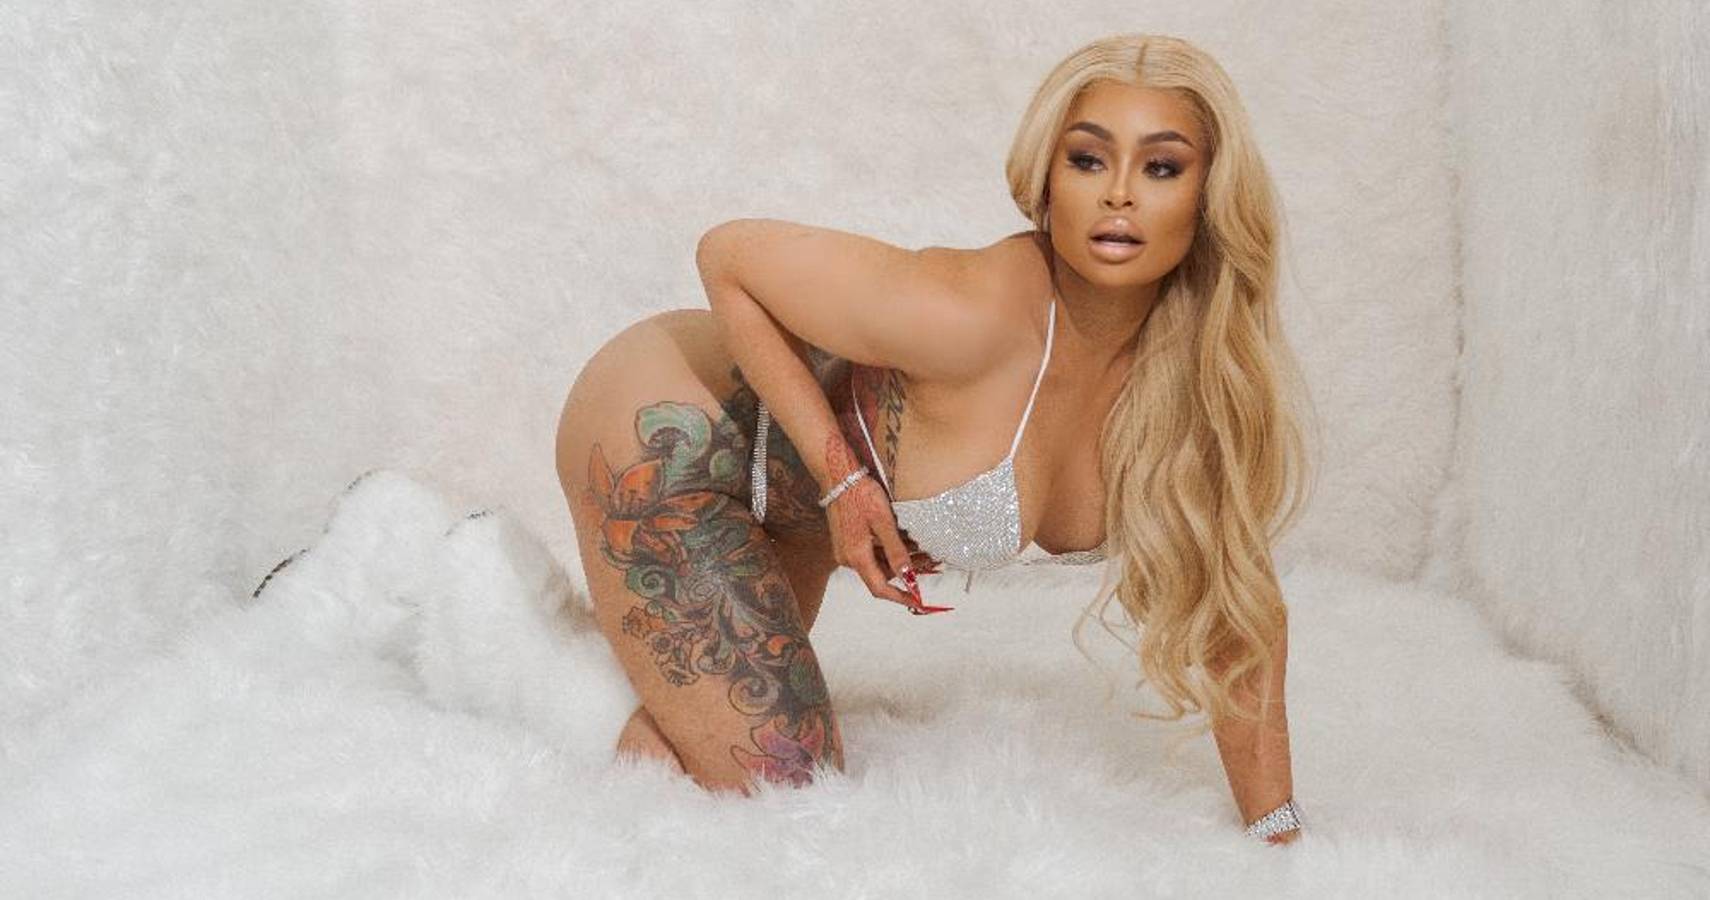 Blacchyna onlyfans nude